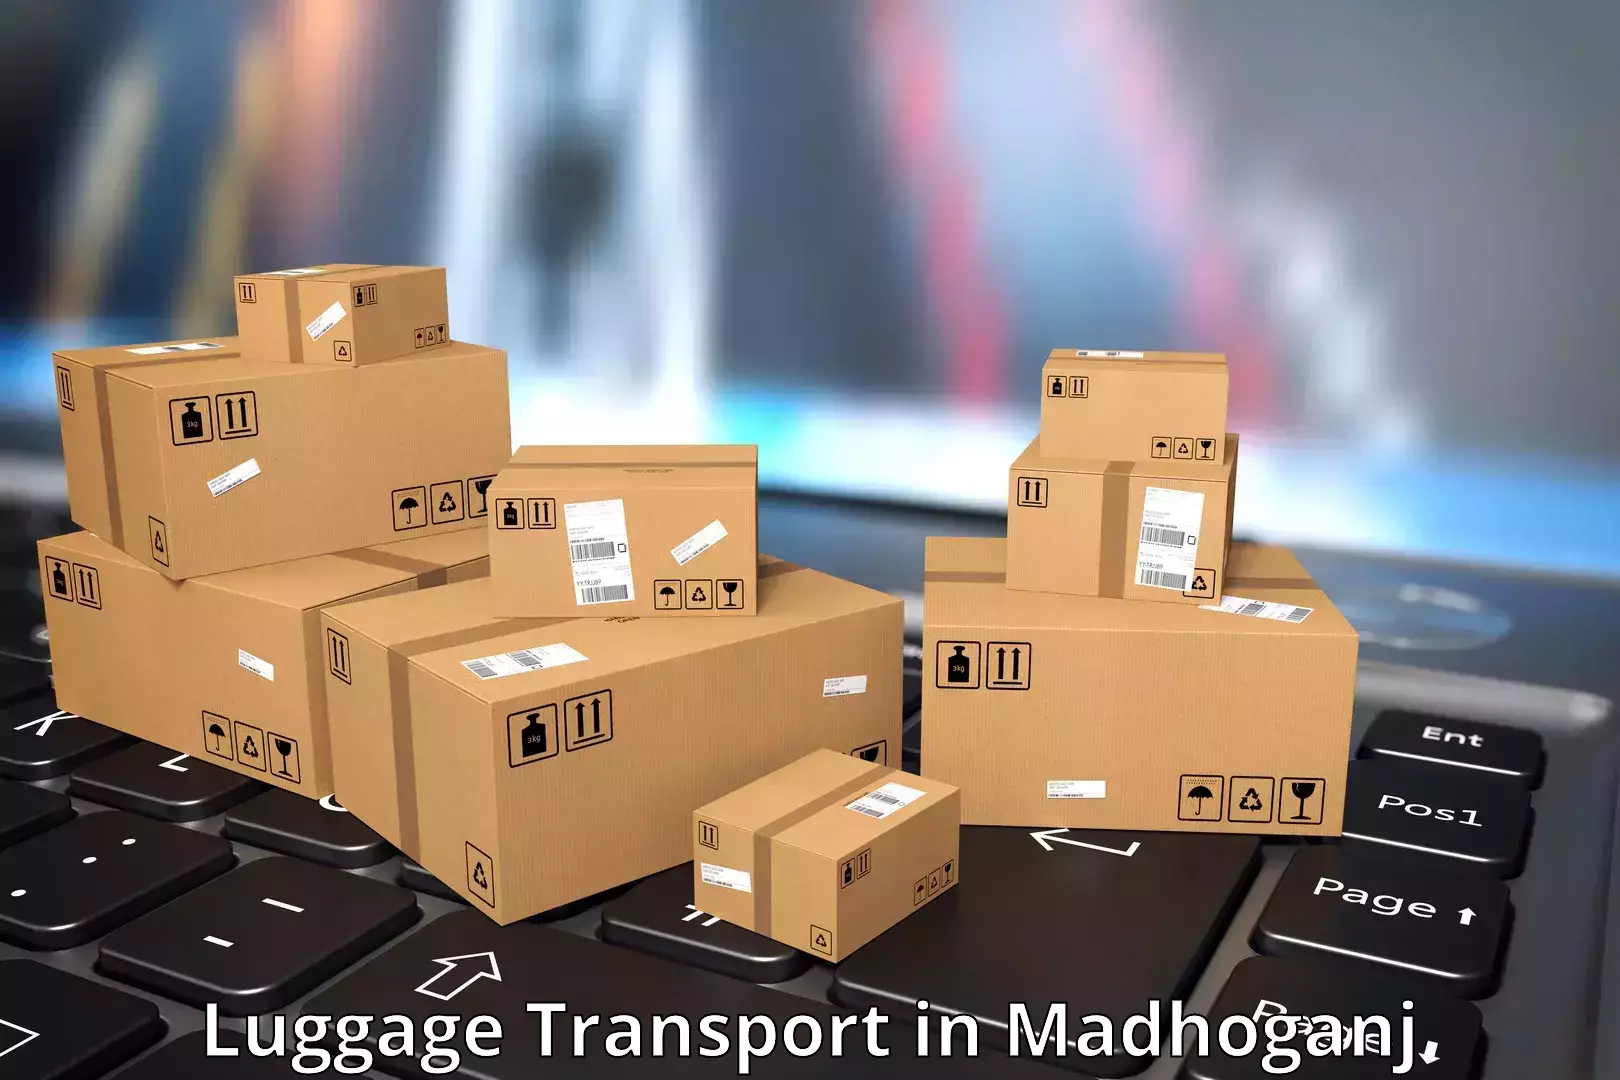 Customized luggage delivery in Madhoganj